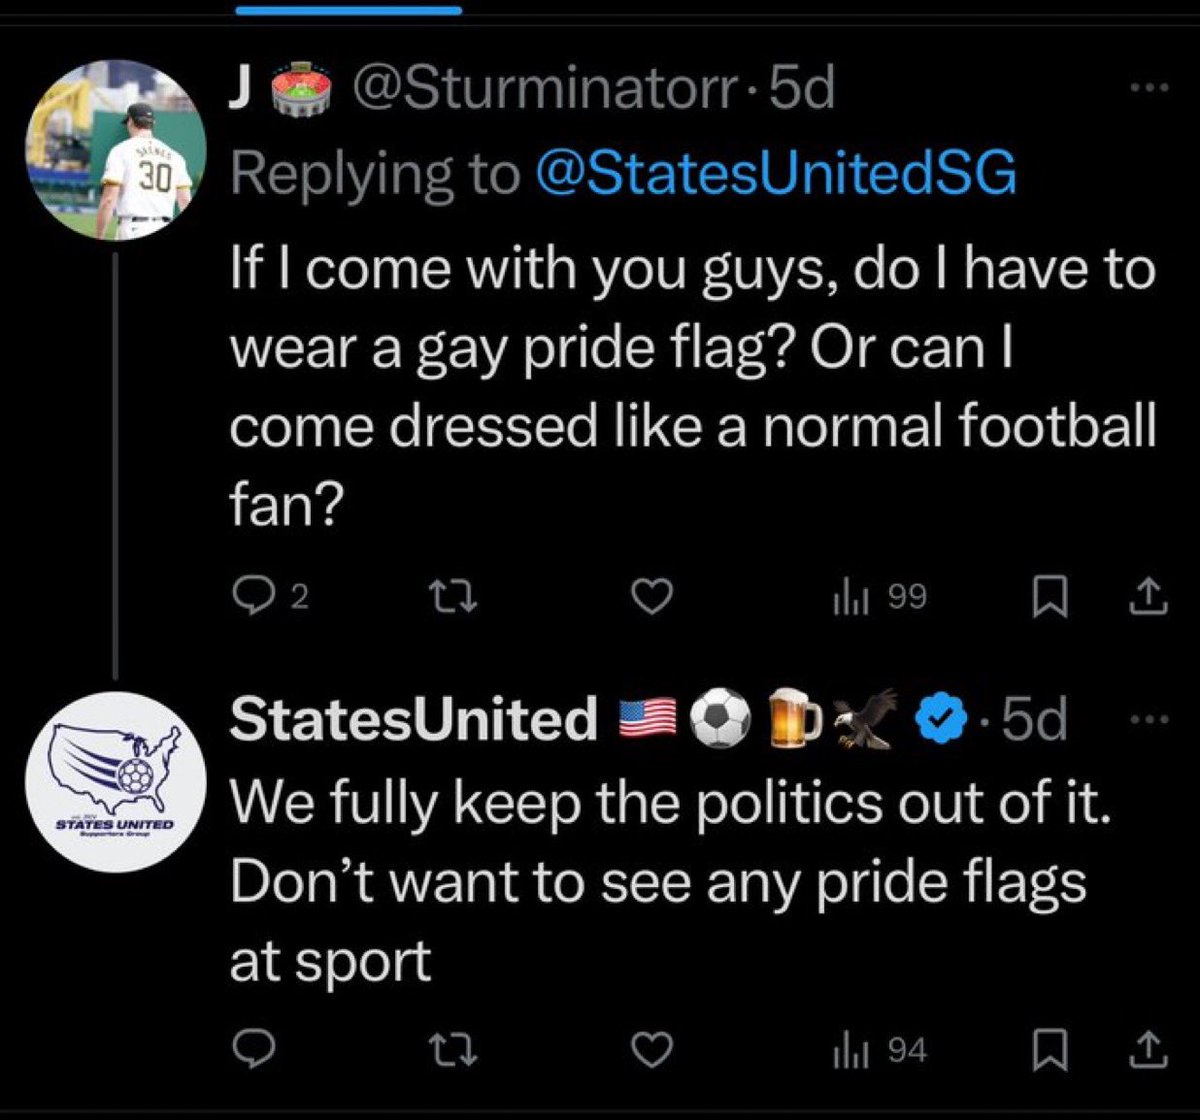 I don't wanna beat this horse too much, but besides the basic misunderstanding that this sport has always been political, you fundamentally misunderstand that the pride flag is not actually inherently political.